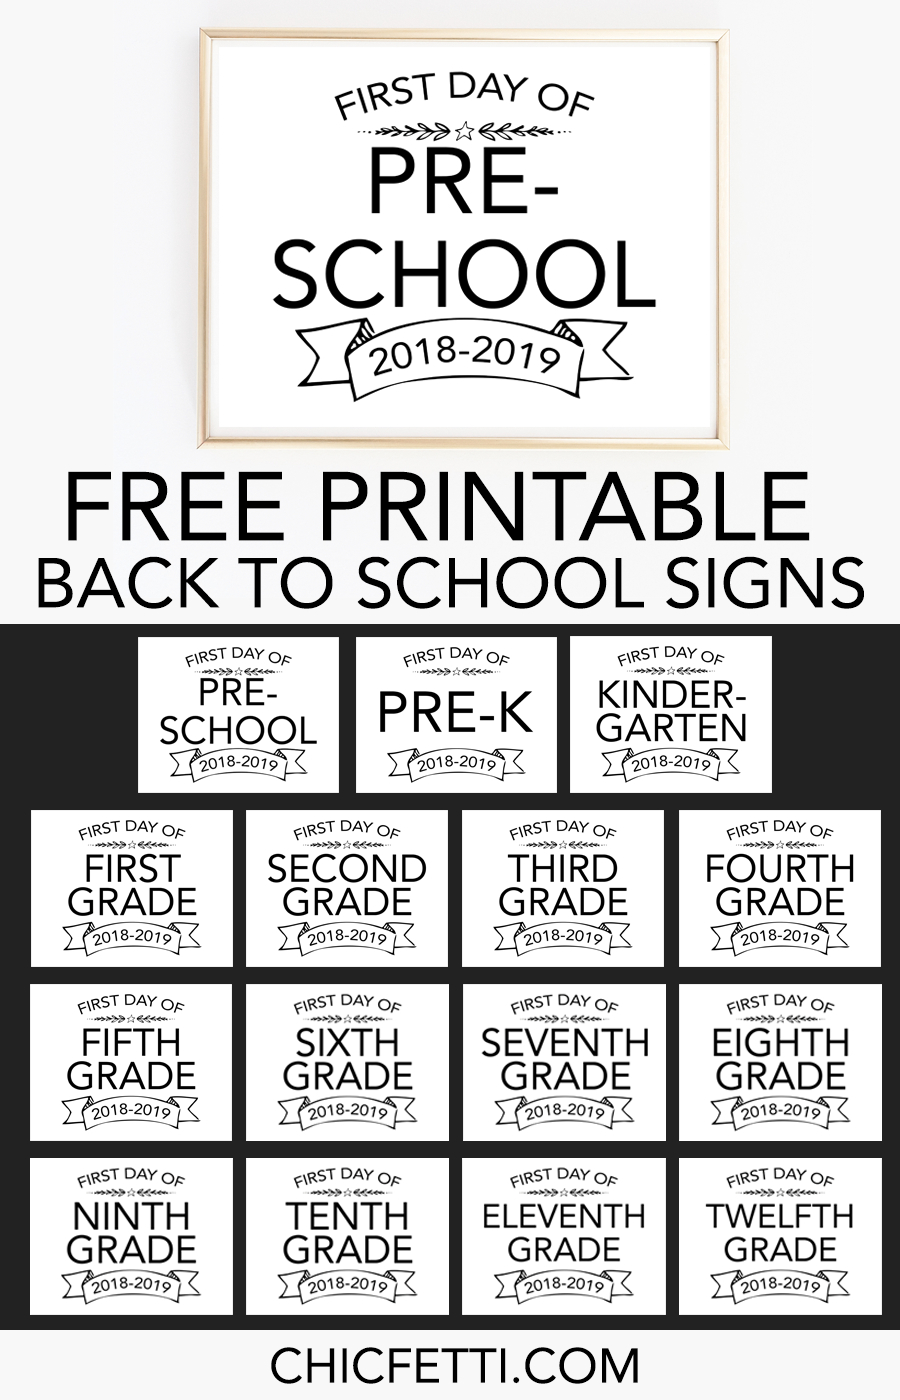 Printable Back To School Signs - Print Our Free First Day Of School - Free Printable Custom Signs